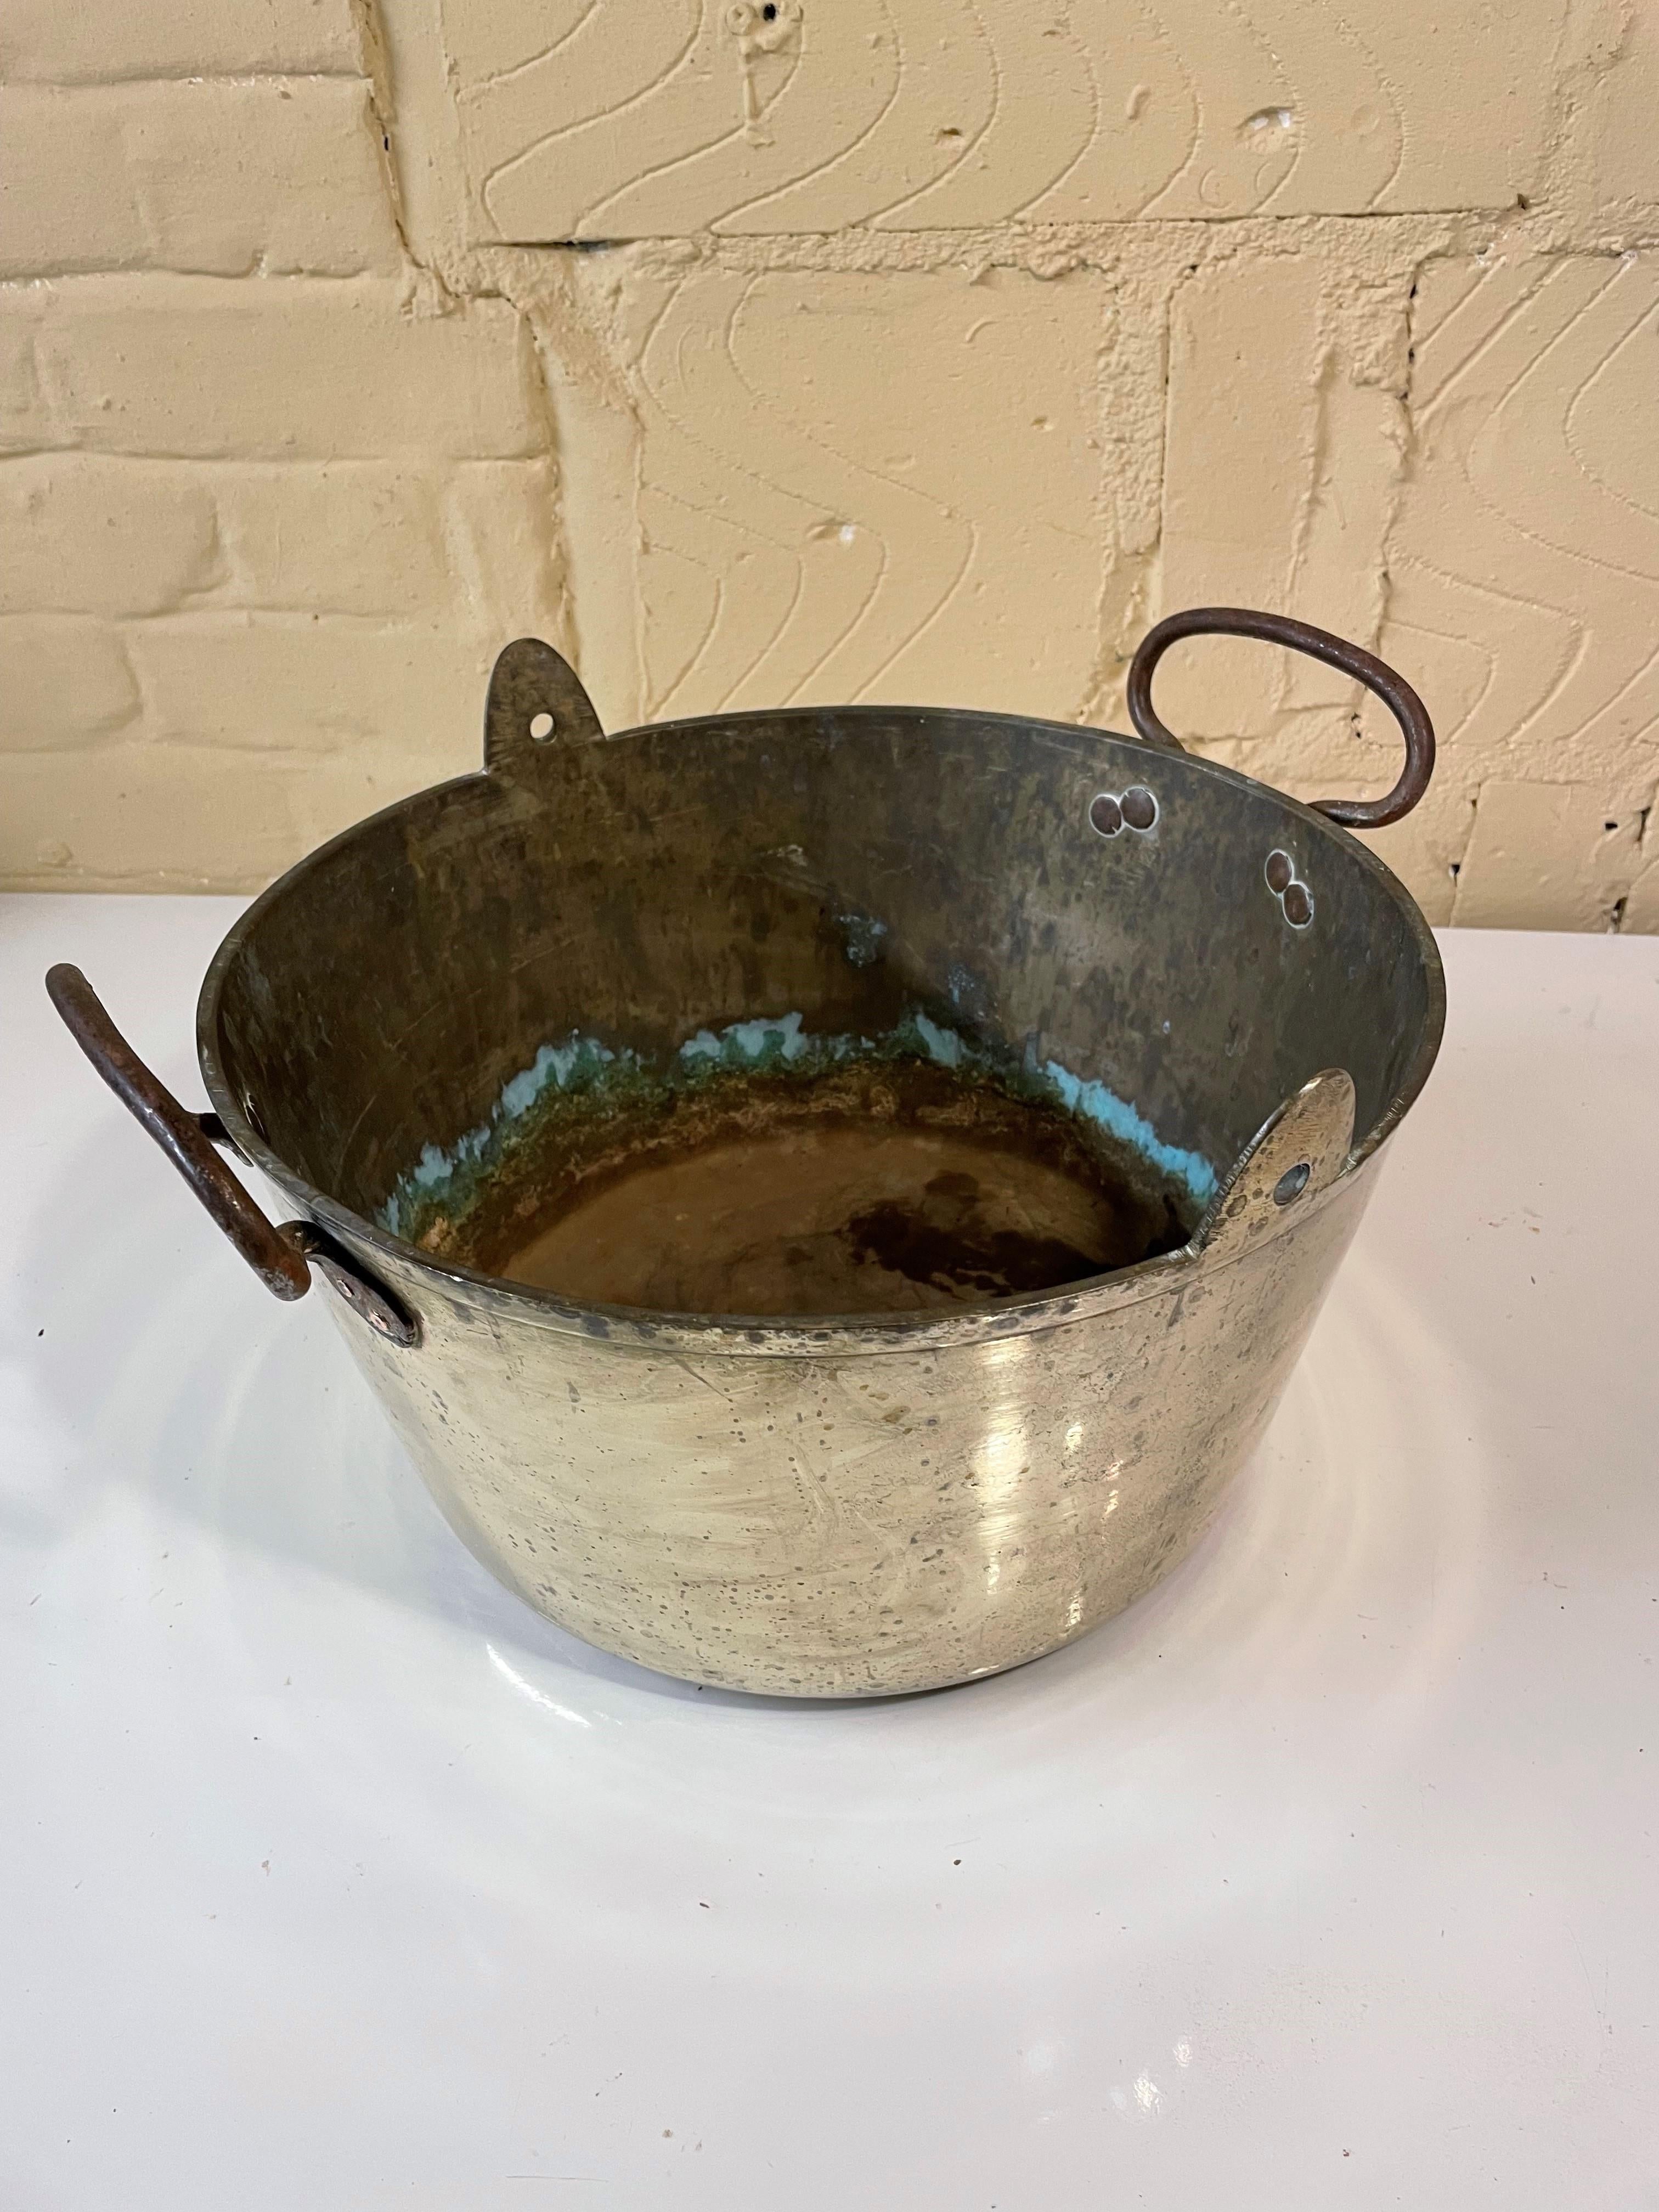 Good quality brass jam pan with iron carrying handles with copper rivets alongside holes that would have been used with a hook to suspend the pan over a fire. Probably dates from the 1870s and is in good vintage condition. Would make a highly